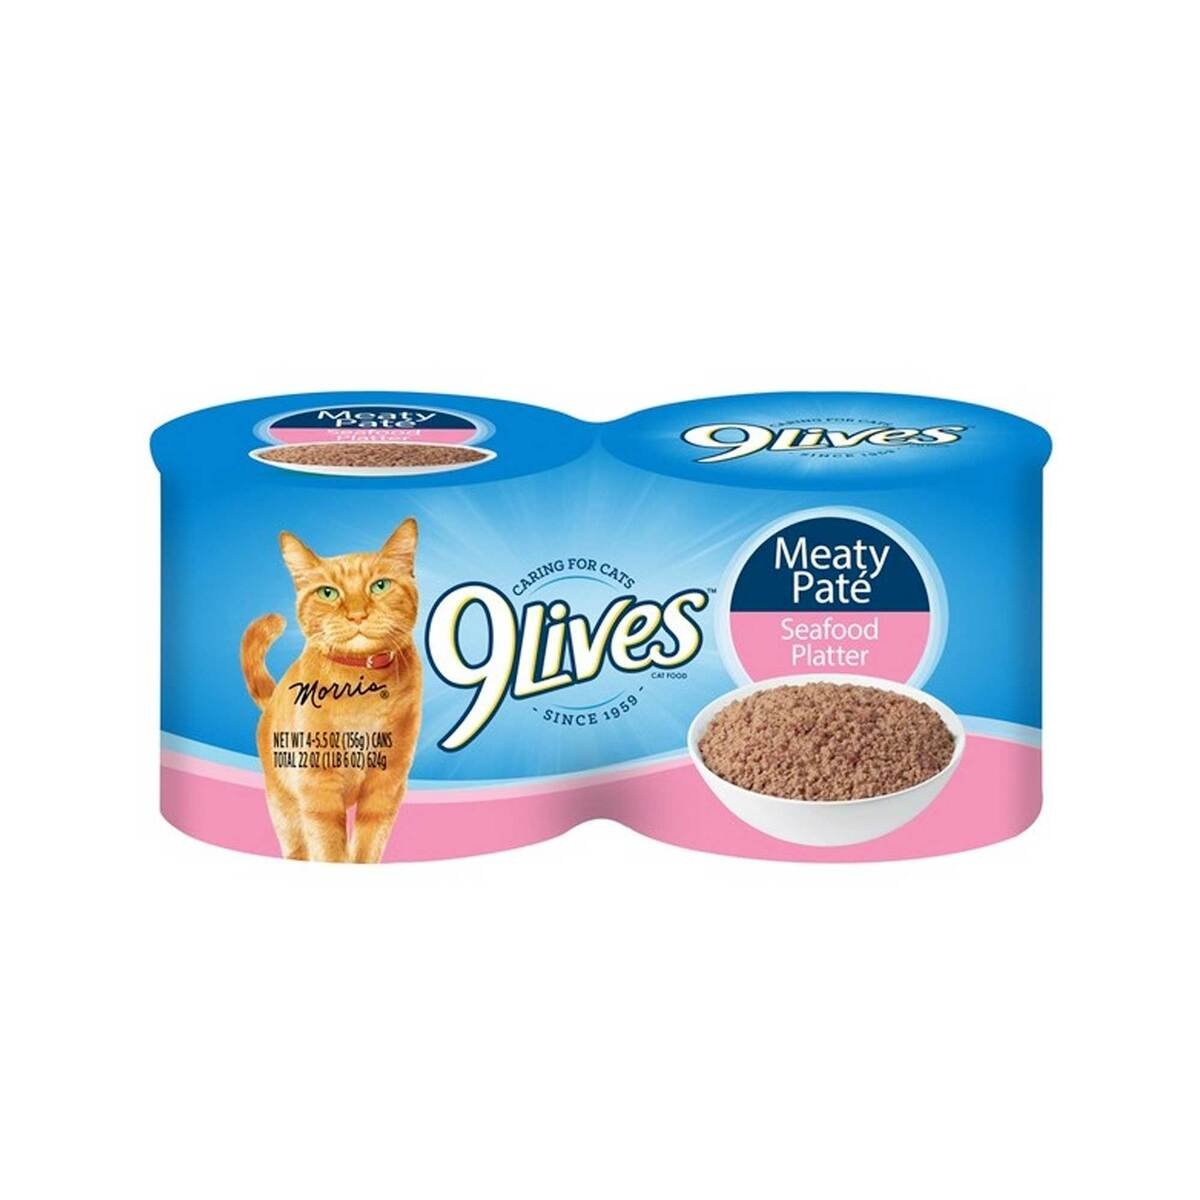 9 Lives Meaty Pate Seafood Platter 624g